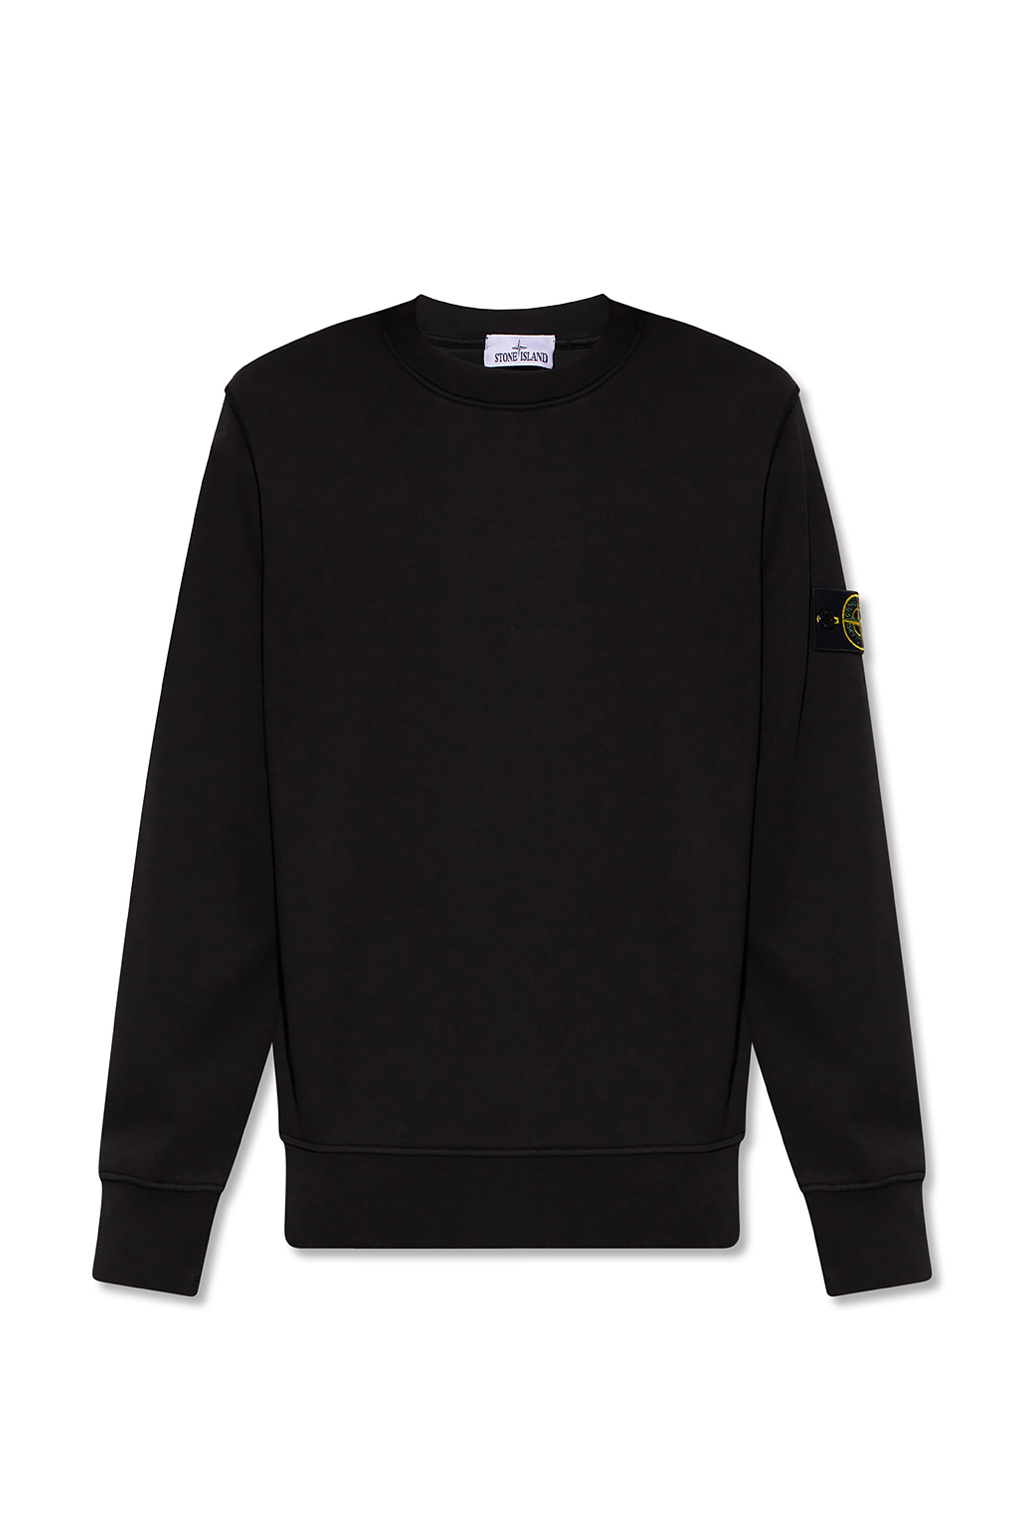 Stone Island and sweatshirts round out the mens offerings